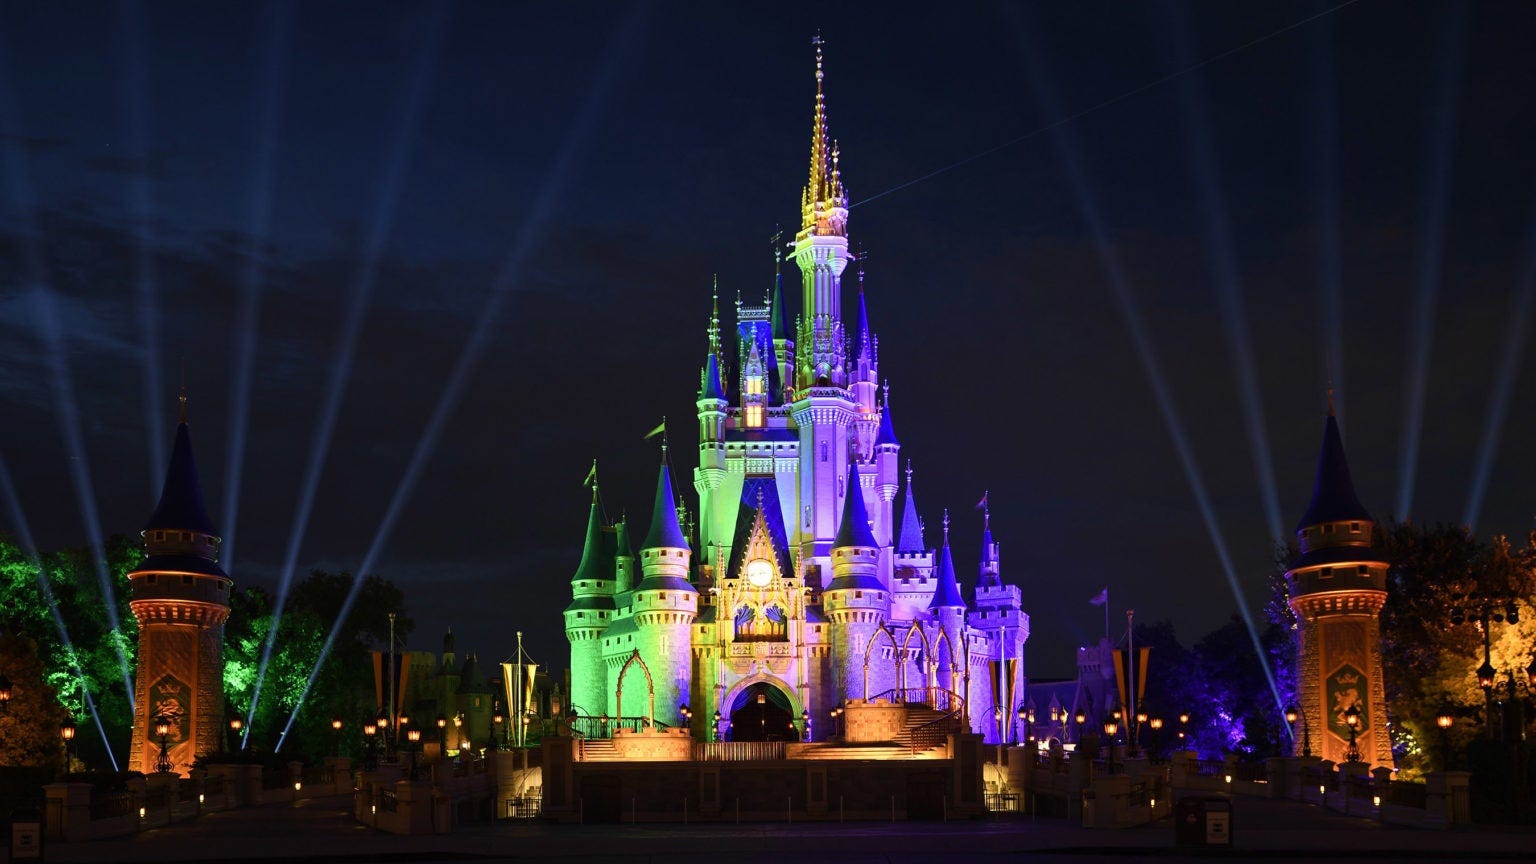 Disney World theme parks booked for Spring Break. Here is what's new